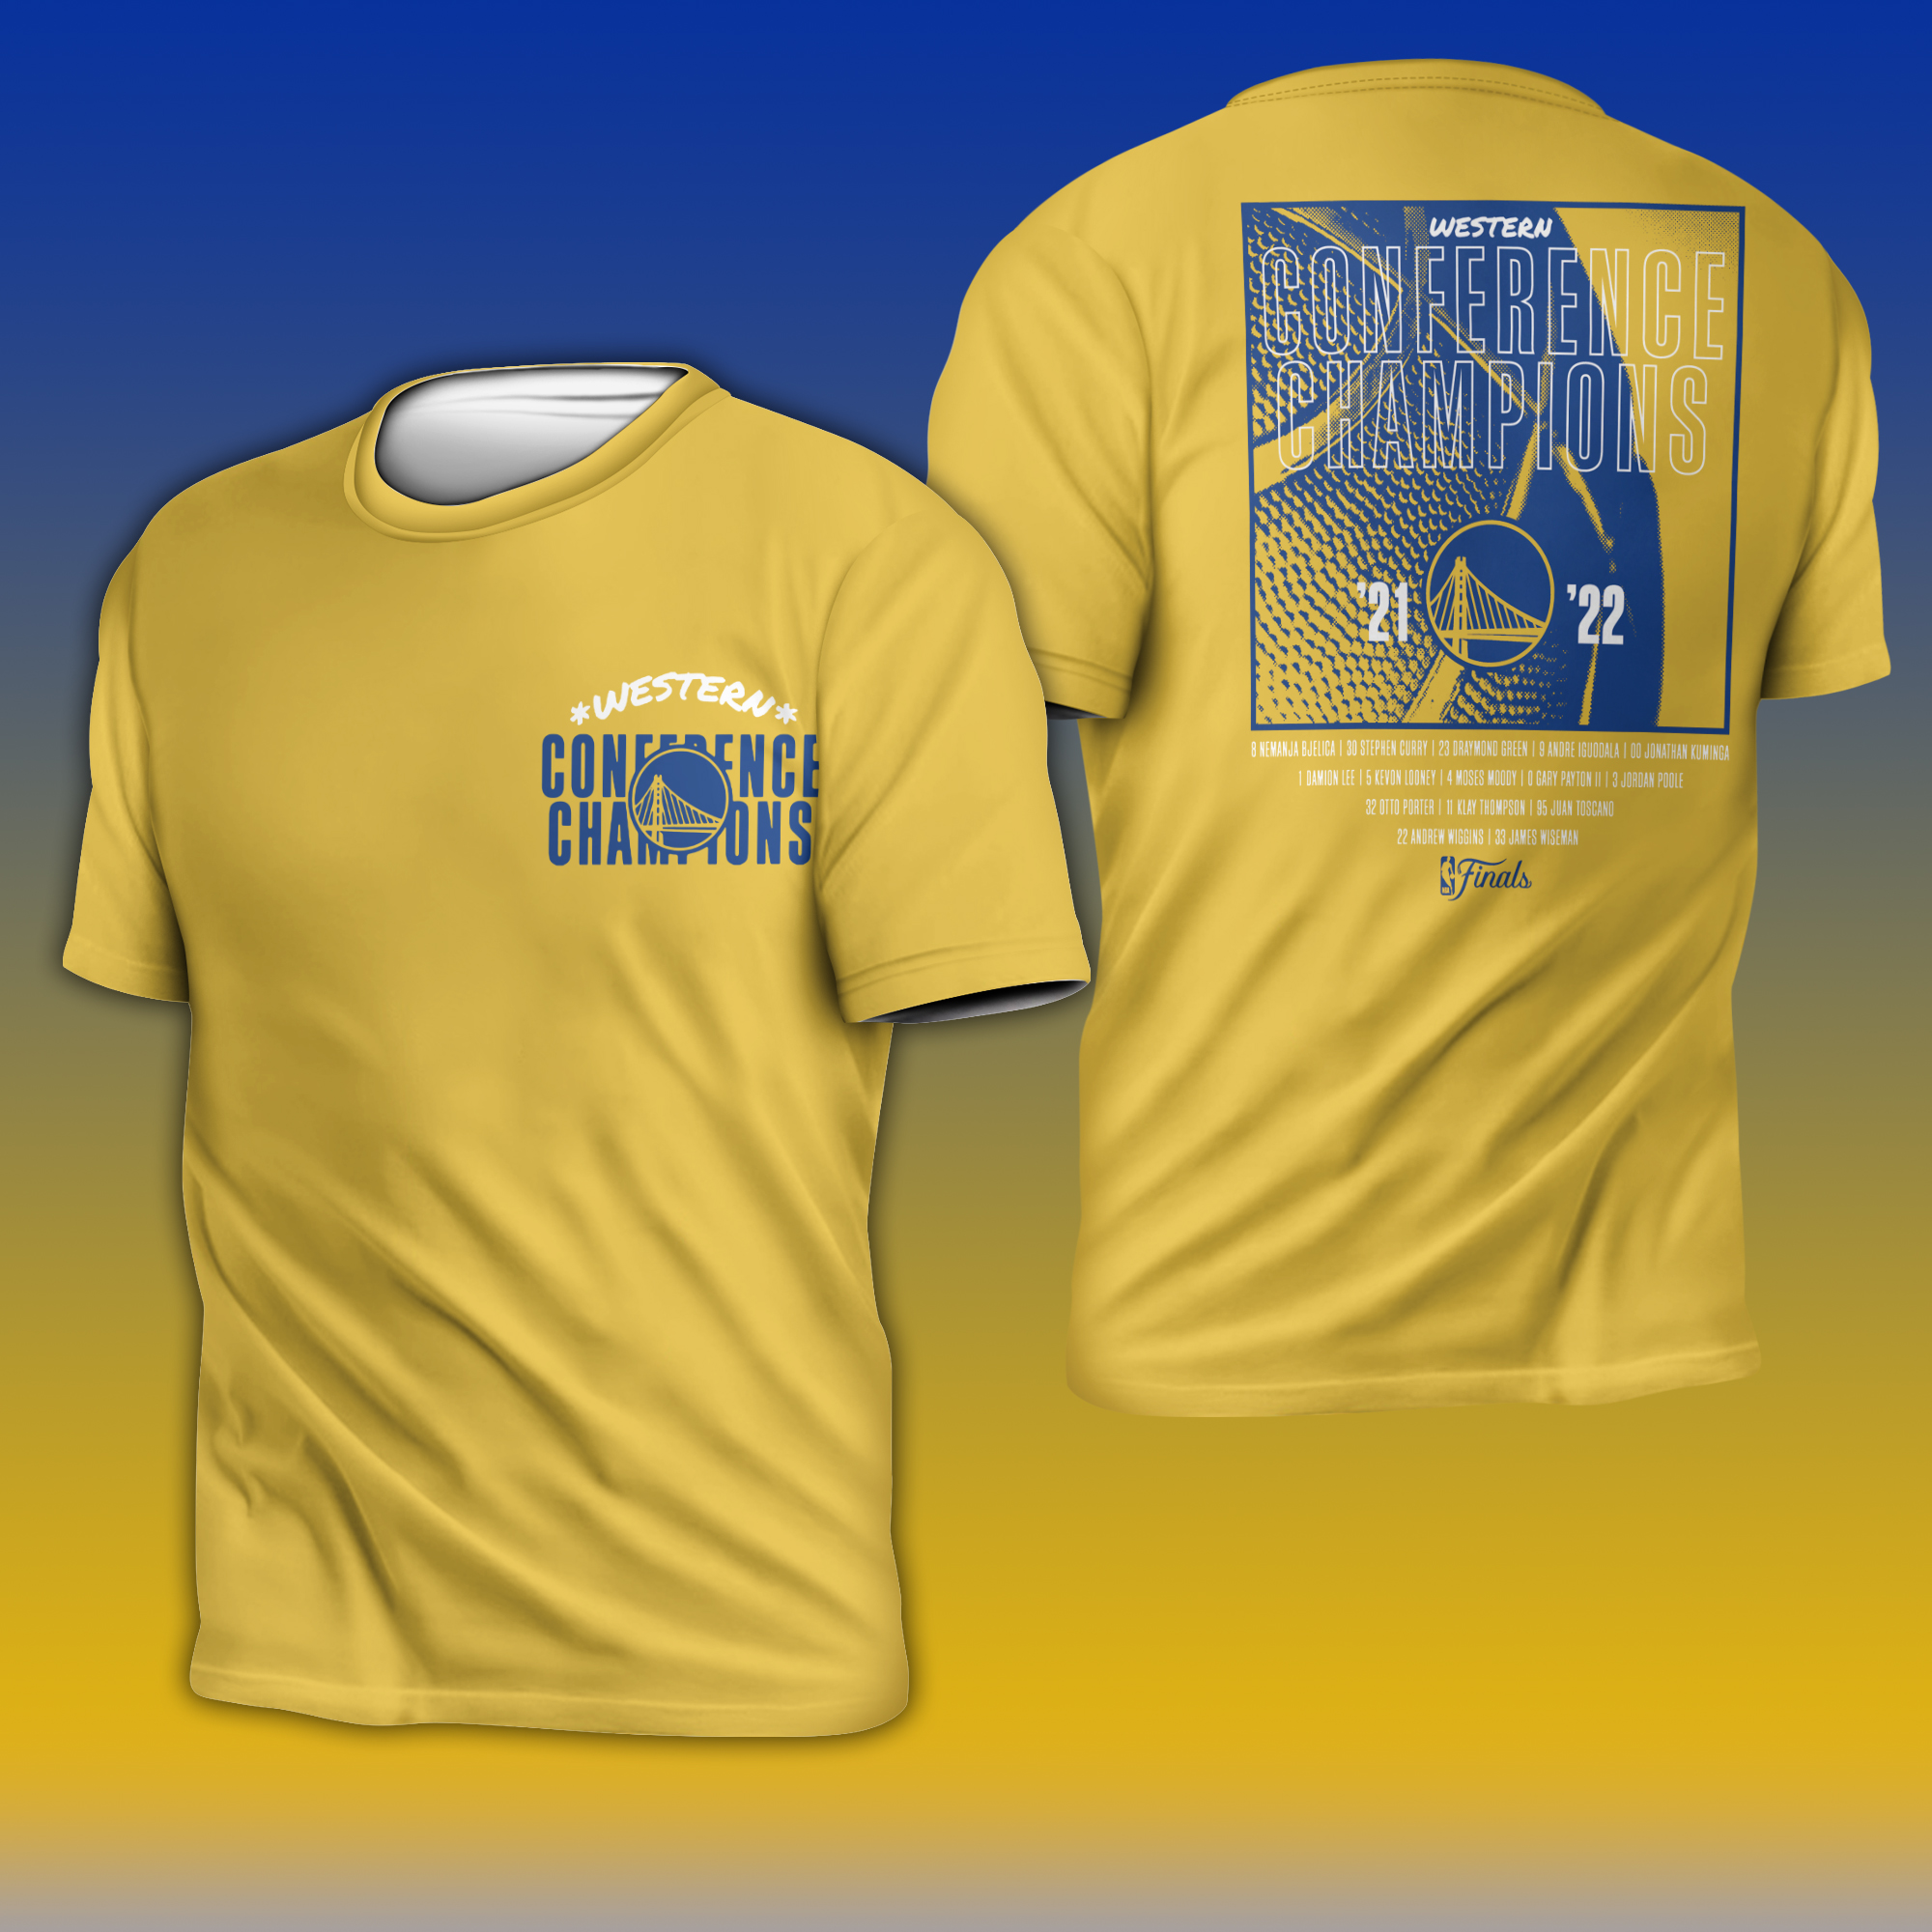 warriors western conference shirts